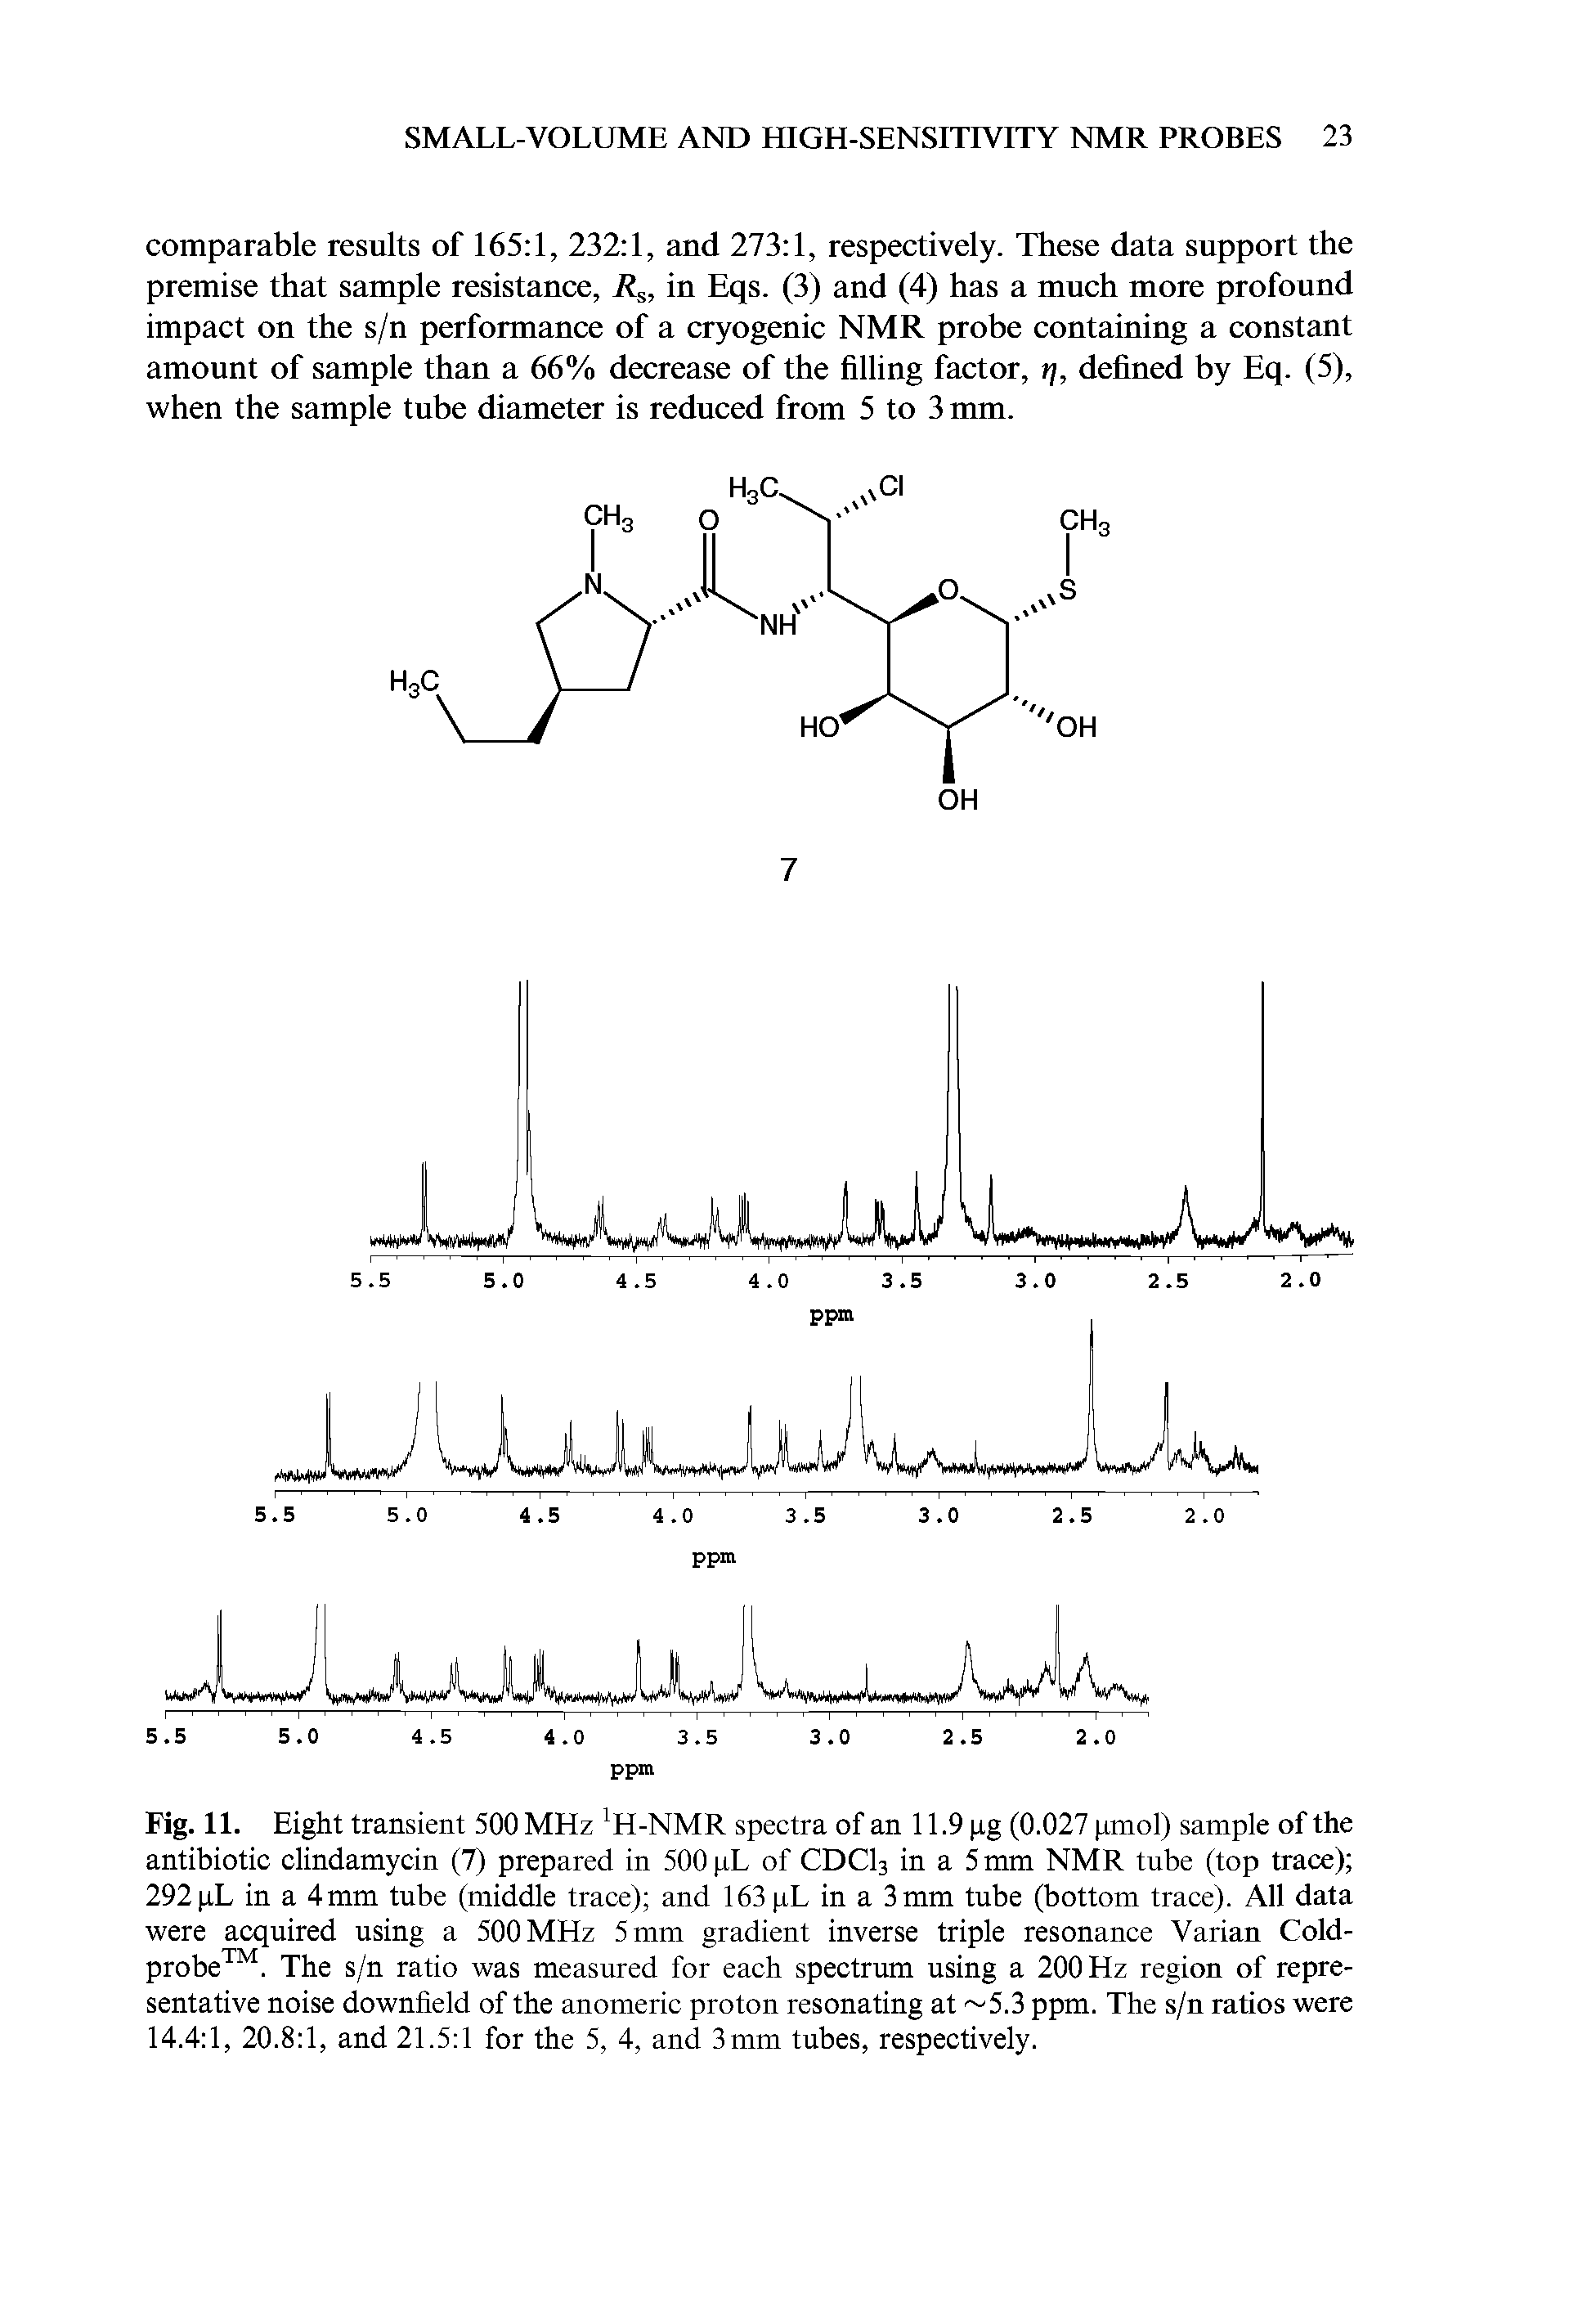 Fig. 11. Eight transient 500 MHz H-NMR spectra of an 11.9 pg (0.027 pmol) sample of the antibiotic clindamycin (7) prepared in 500 pL of CDC13 in a 5 mm NMR tube (top trace) 292 pL in a 4mm tube (middle trace) and 163 pL in a 3 mm tube (bottom trace). All data were acquired using a 500 MHz 5 mm gradient inverse triple resonance Varian Cold-probe . The s/n ratio was measured for each spectrum using a 200 Hz region of representative noise downfield of the anomeric proton resonating at 5.3 ppm. The s/n ratios were 14.4 1, 20.8 1, and 21.5 1 for the 5, 4, and 3mm tubes, respectively.